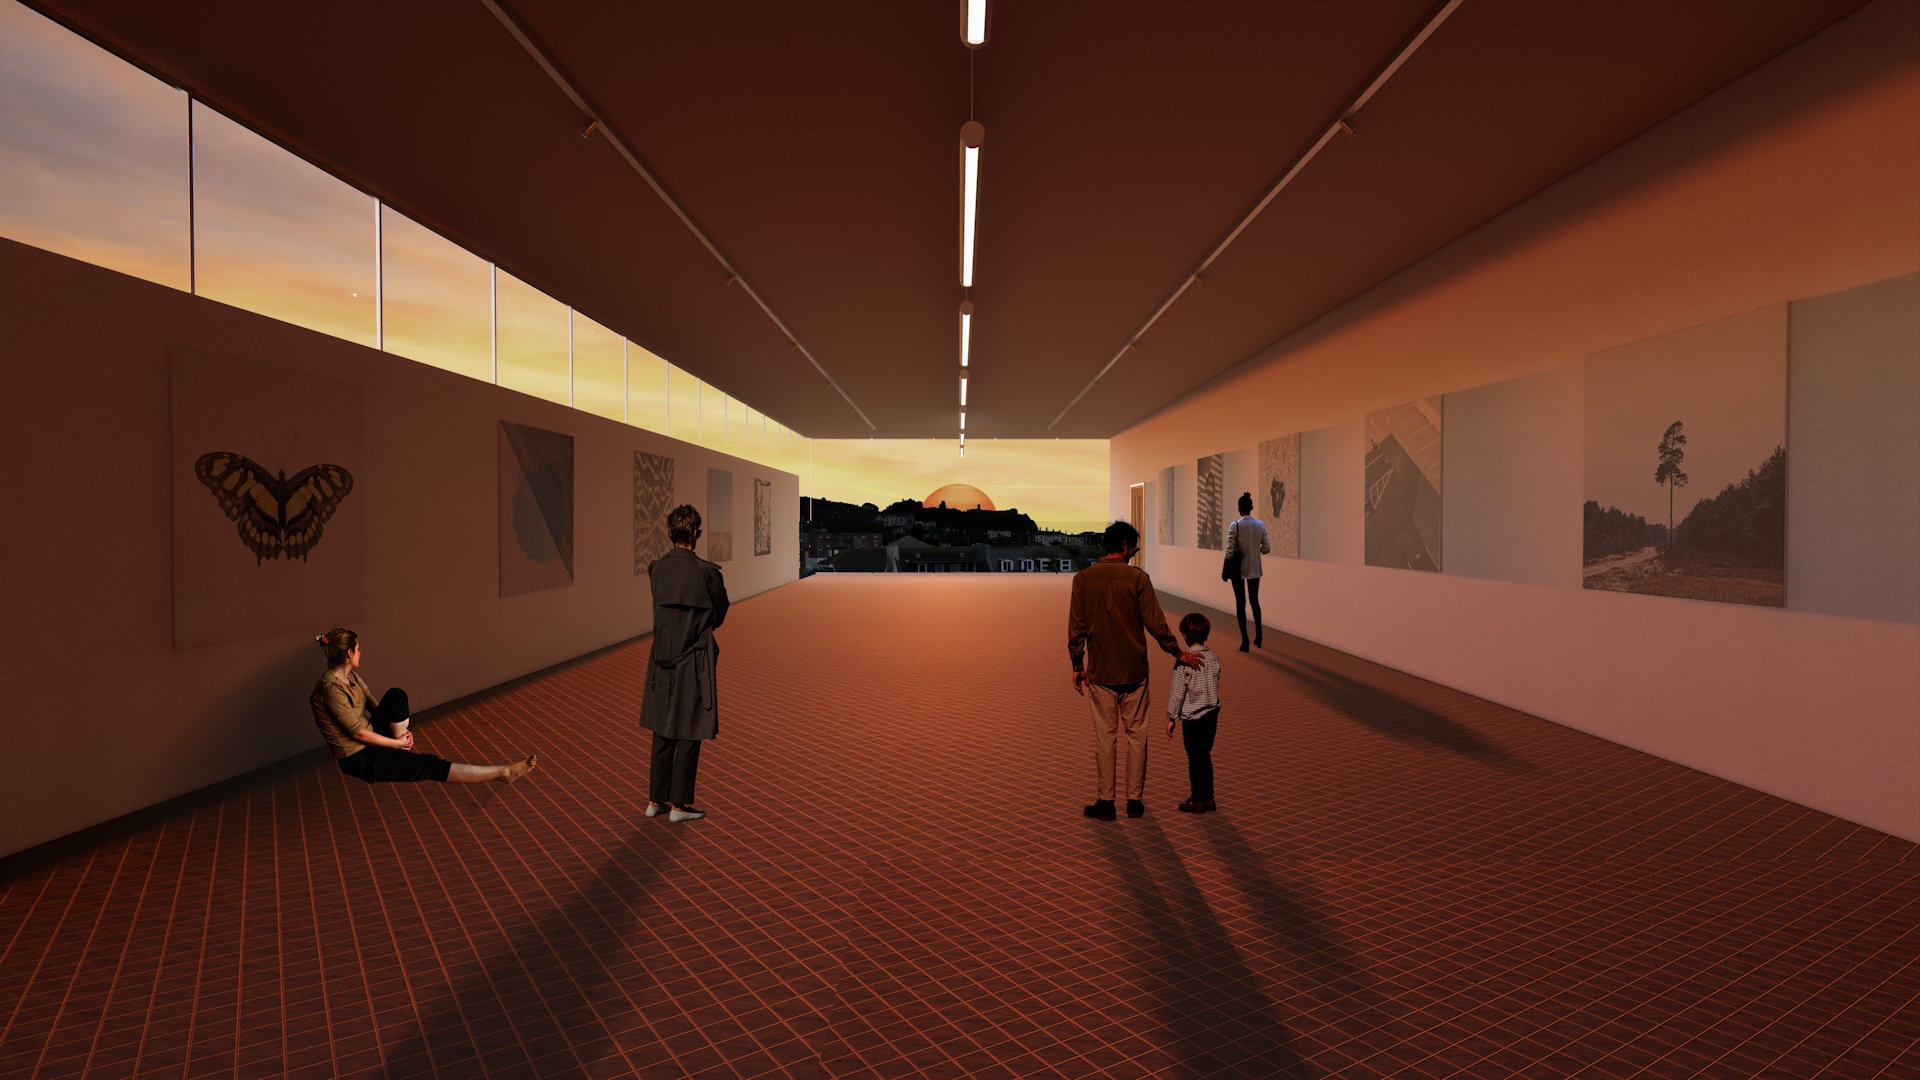 A rendered image of several people standing in an art gallery, with the rising sun shining through the window at the far end.